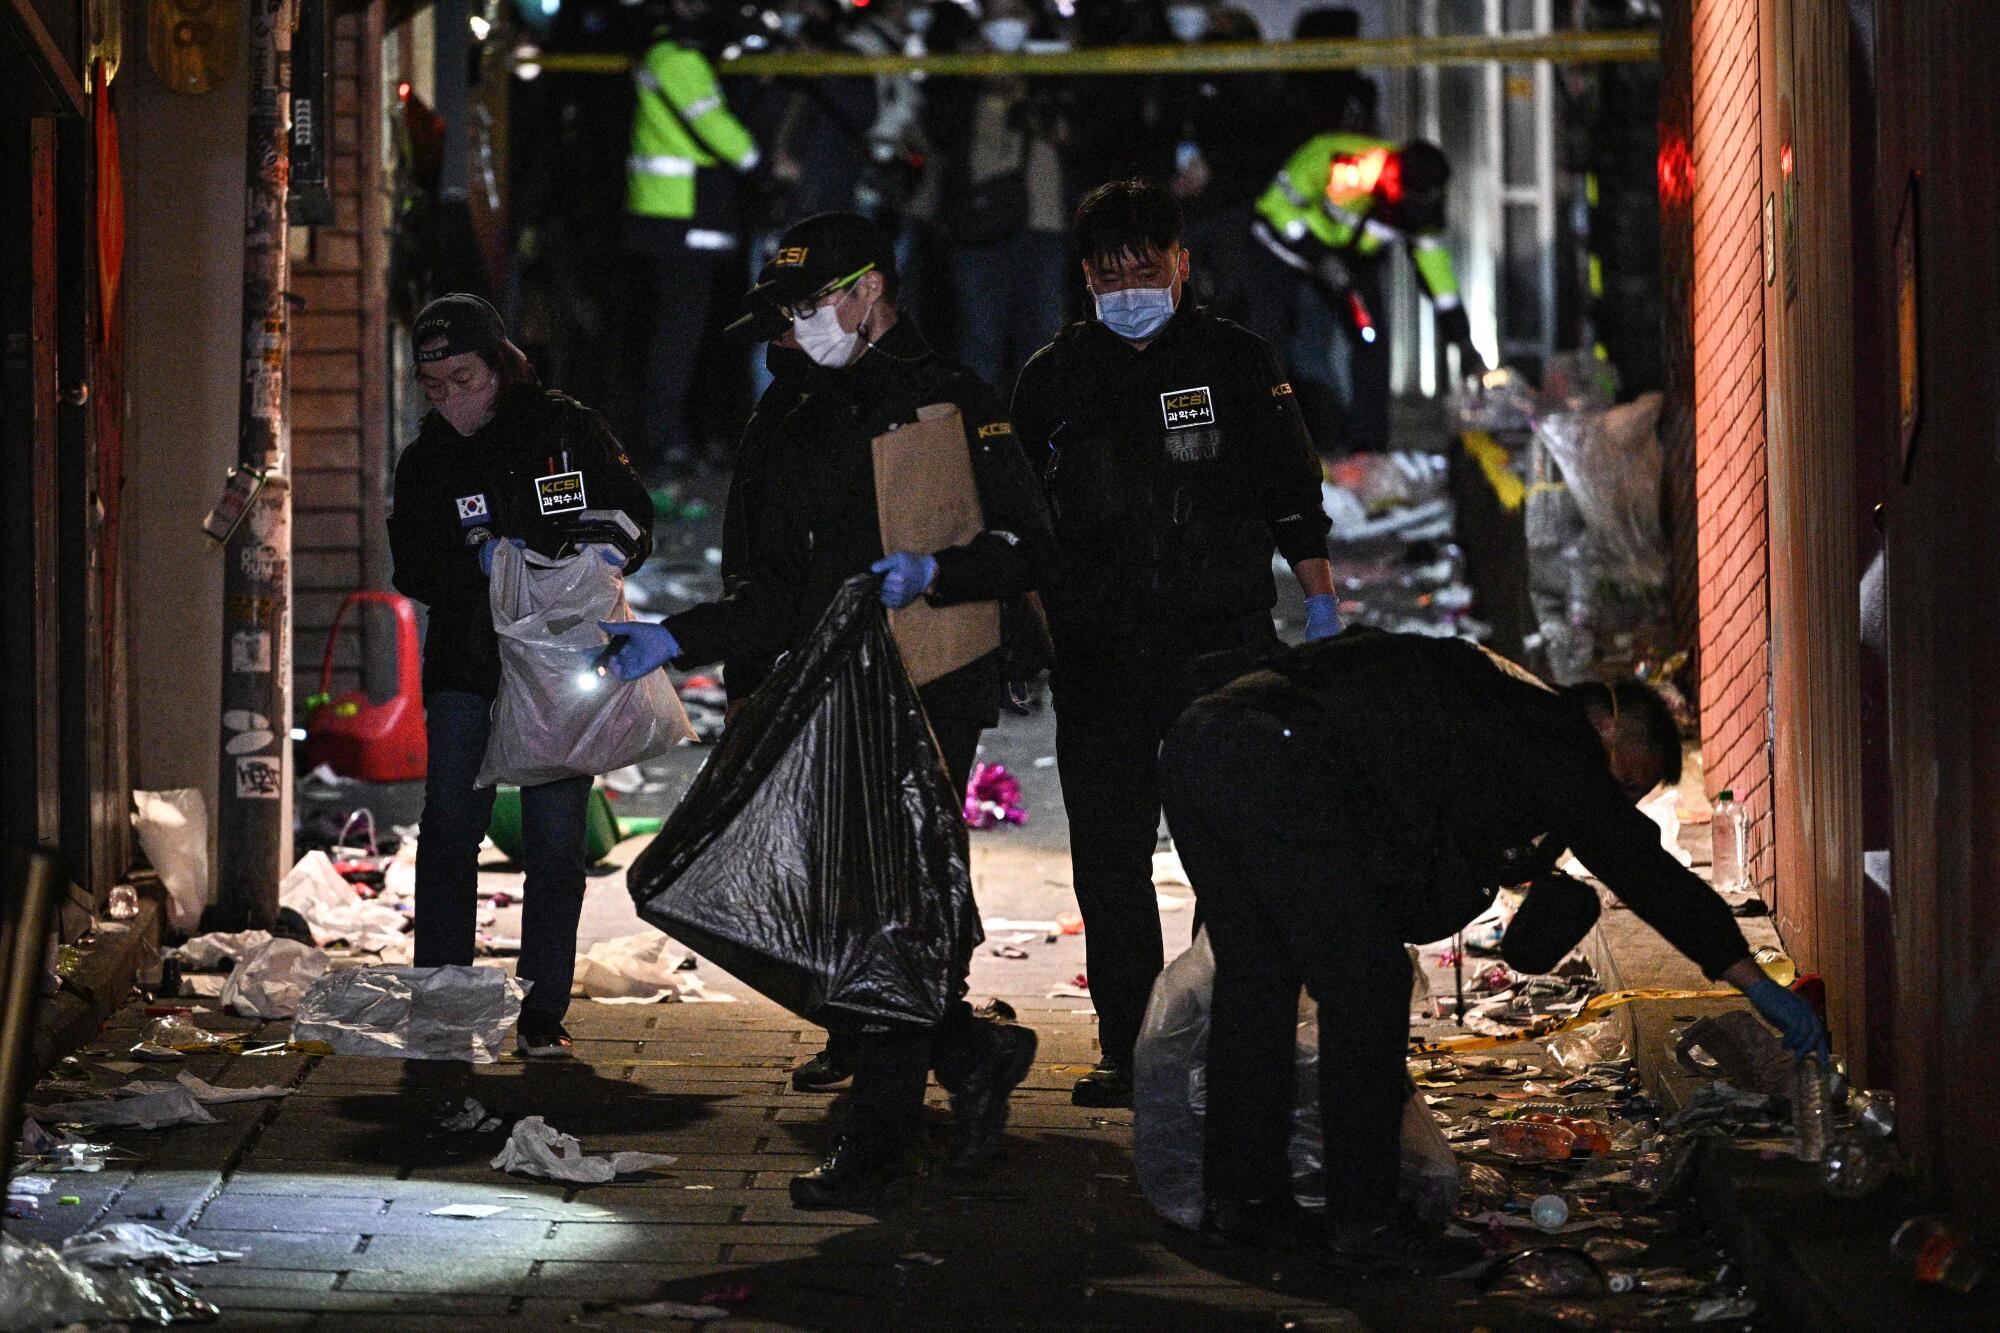 Uniformed crime scene investigators carry plastic bags and collect items from the ground in a debris-filled alley 